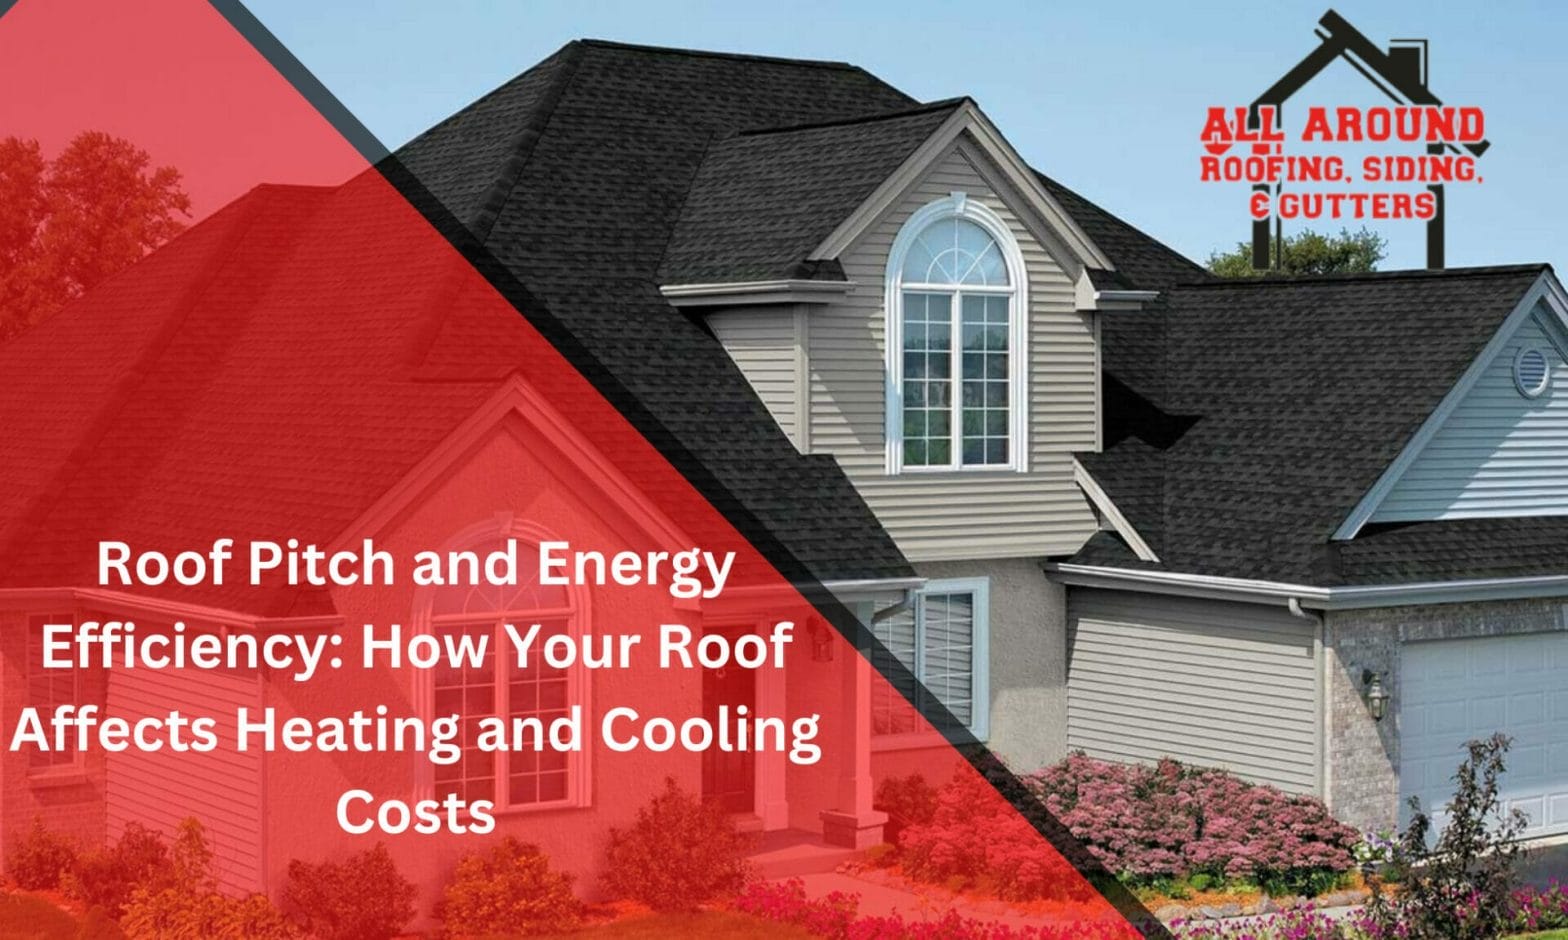 Roof Pitch and Energy Efficiency: How Your Roof Affects Heating and Cooling Costs